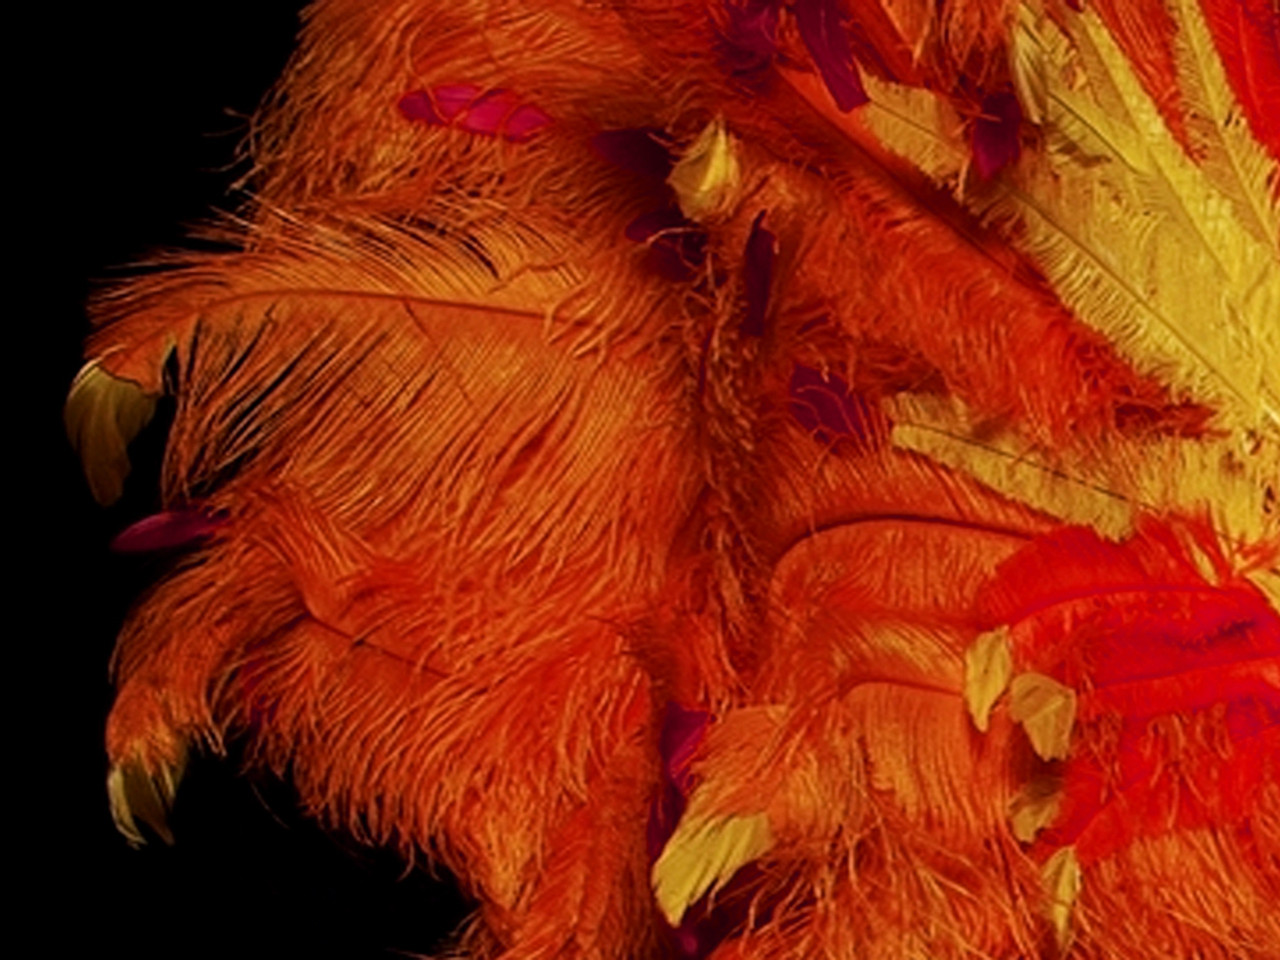 All Ostrich Wing Plume Feathers 20-25 inches by the Piece (CHOOSE YOUR  COLOR)